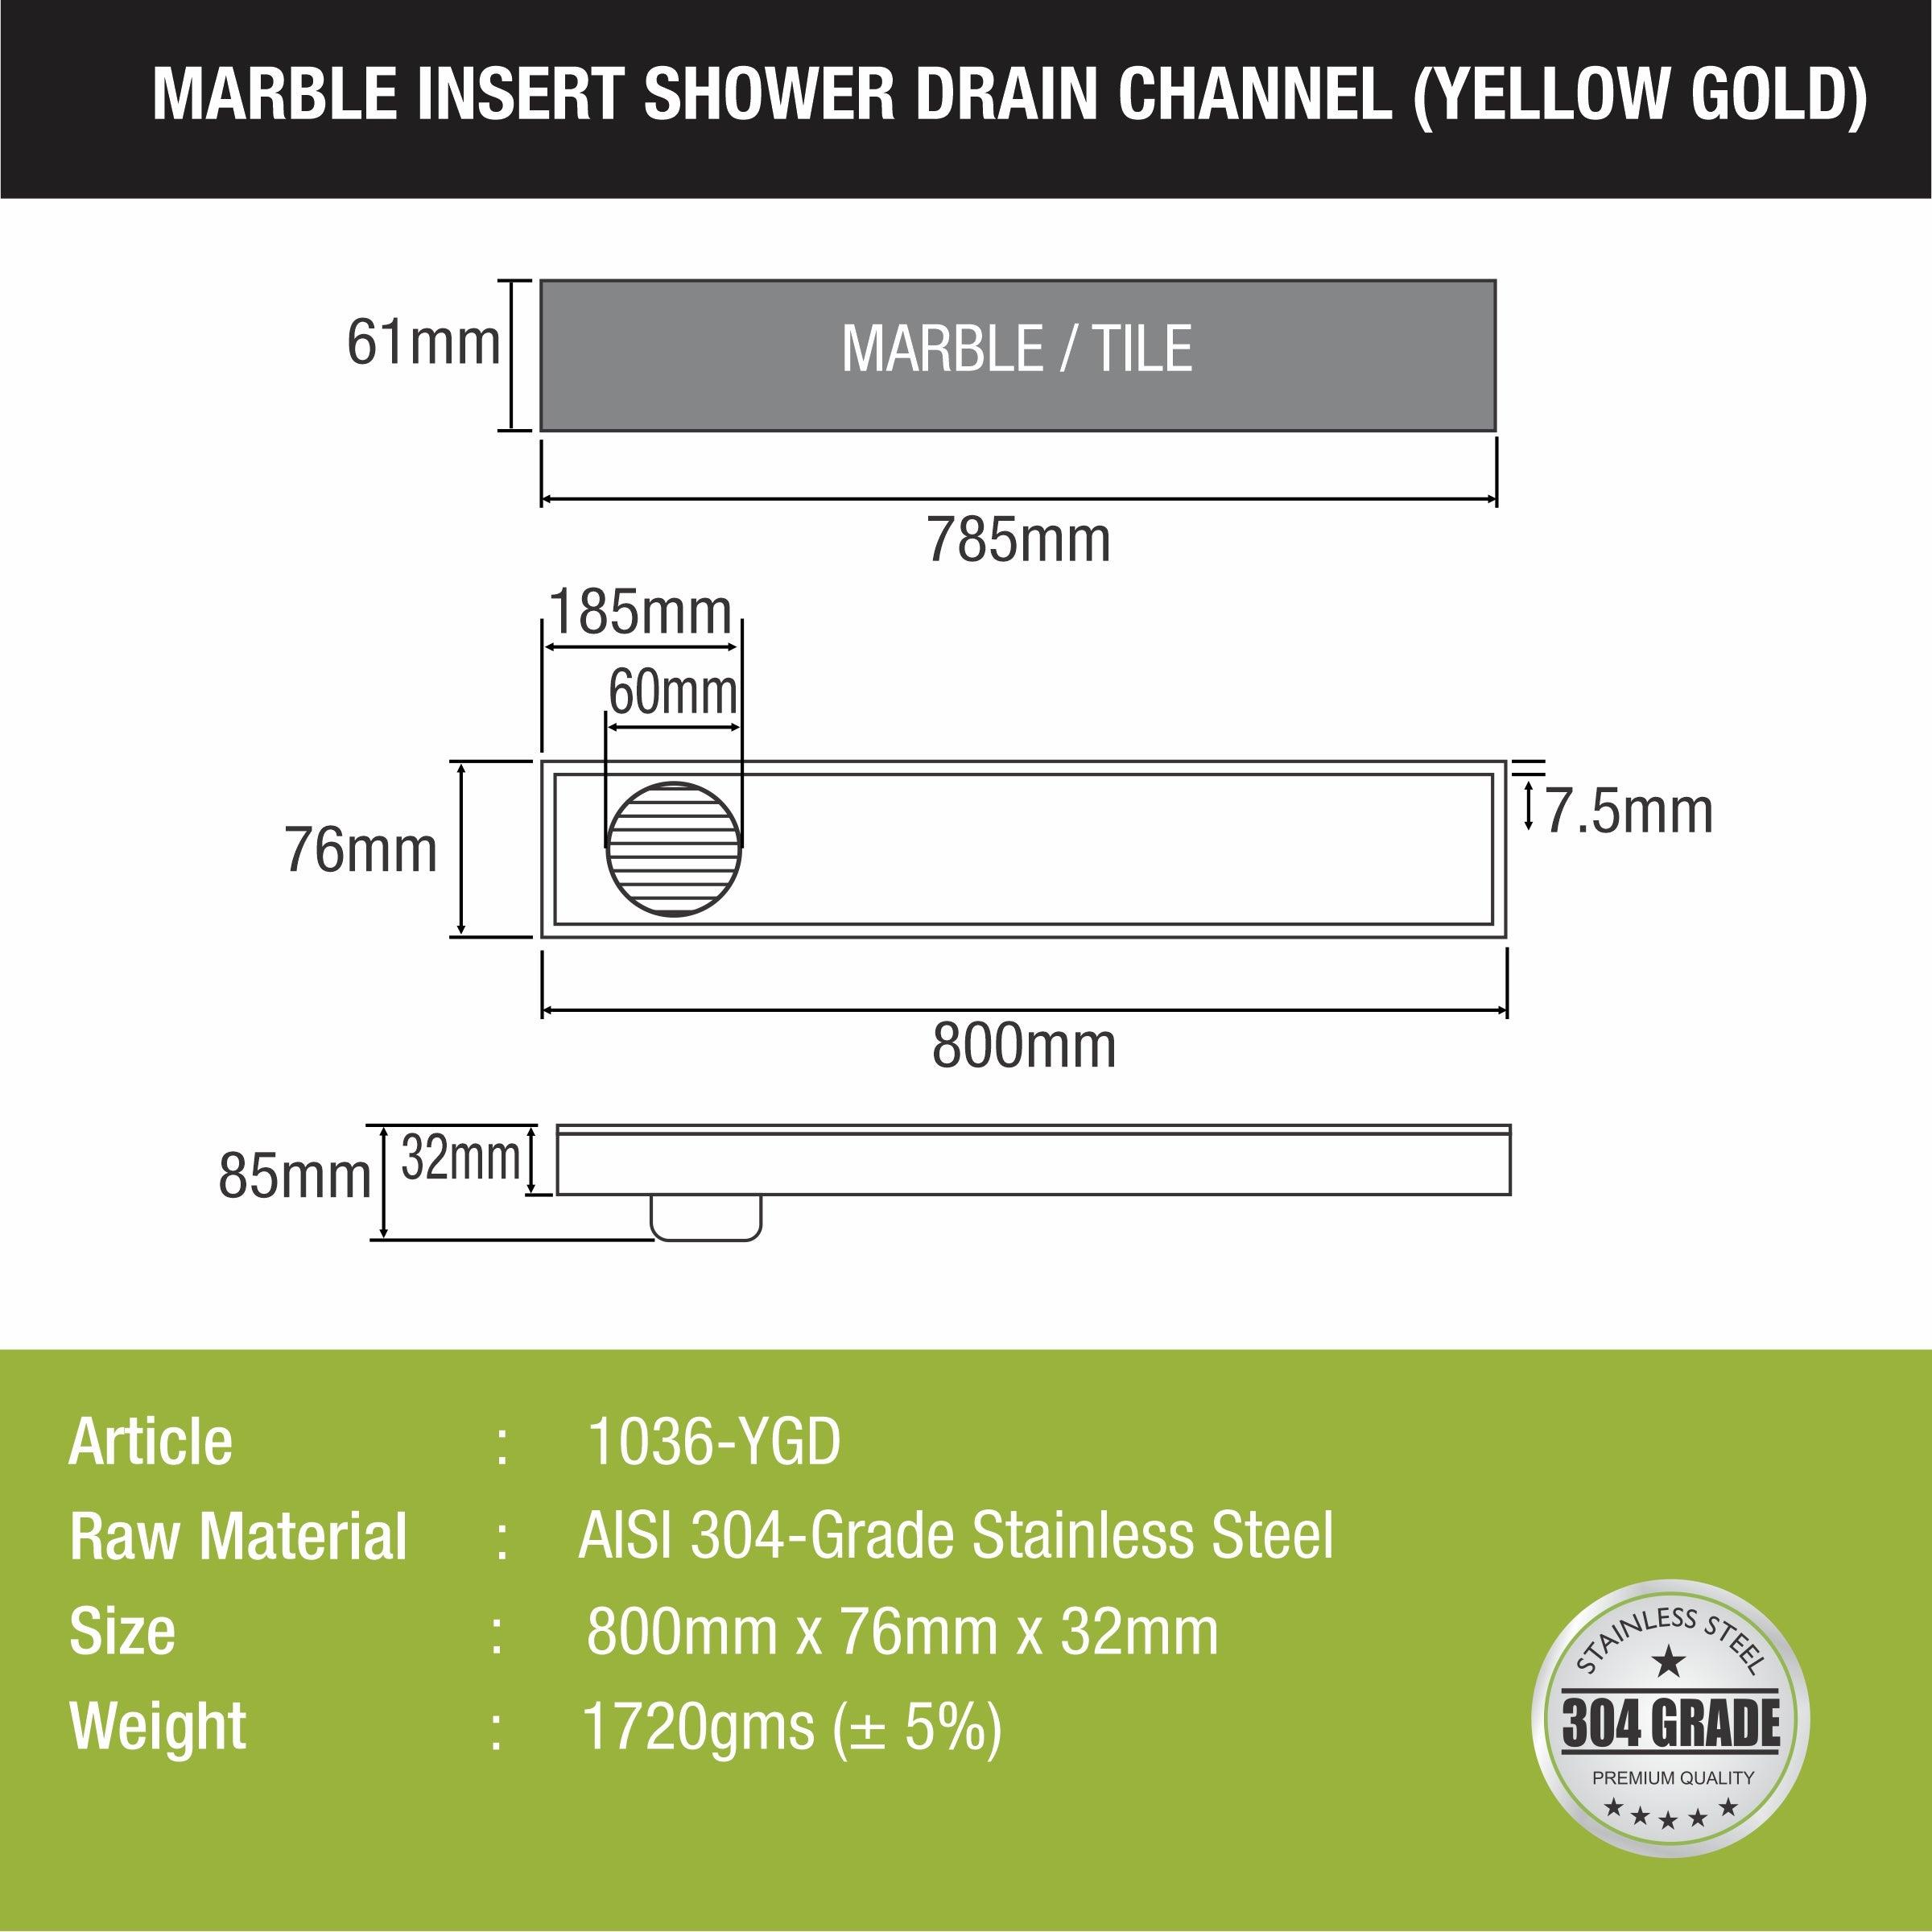 Marble Insert Shower Drain Channel - Yellow Gold (32 x 3 Inches) sizes and dimensions